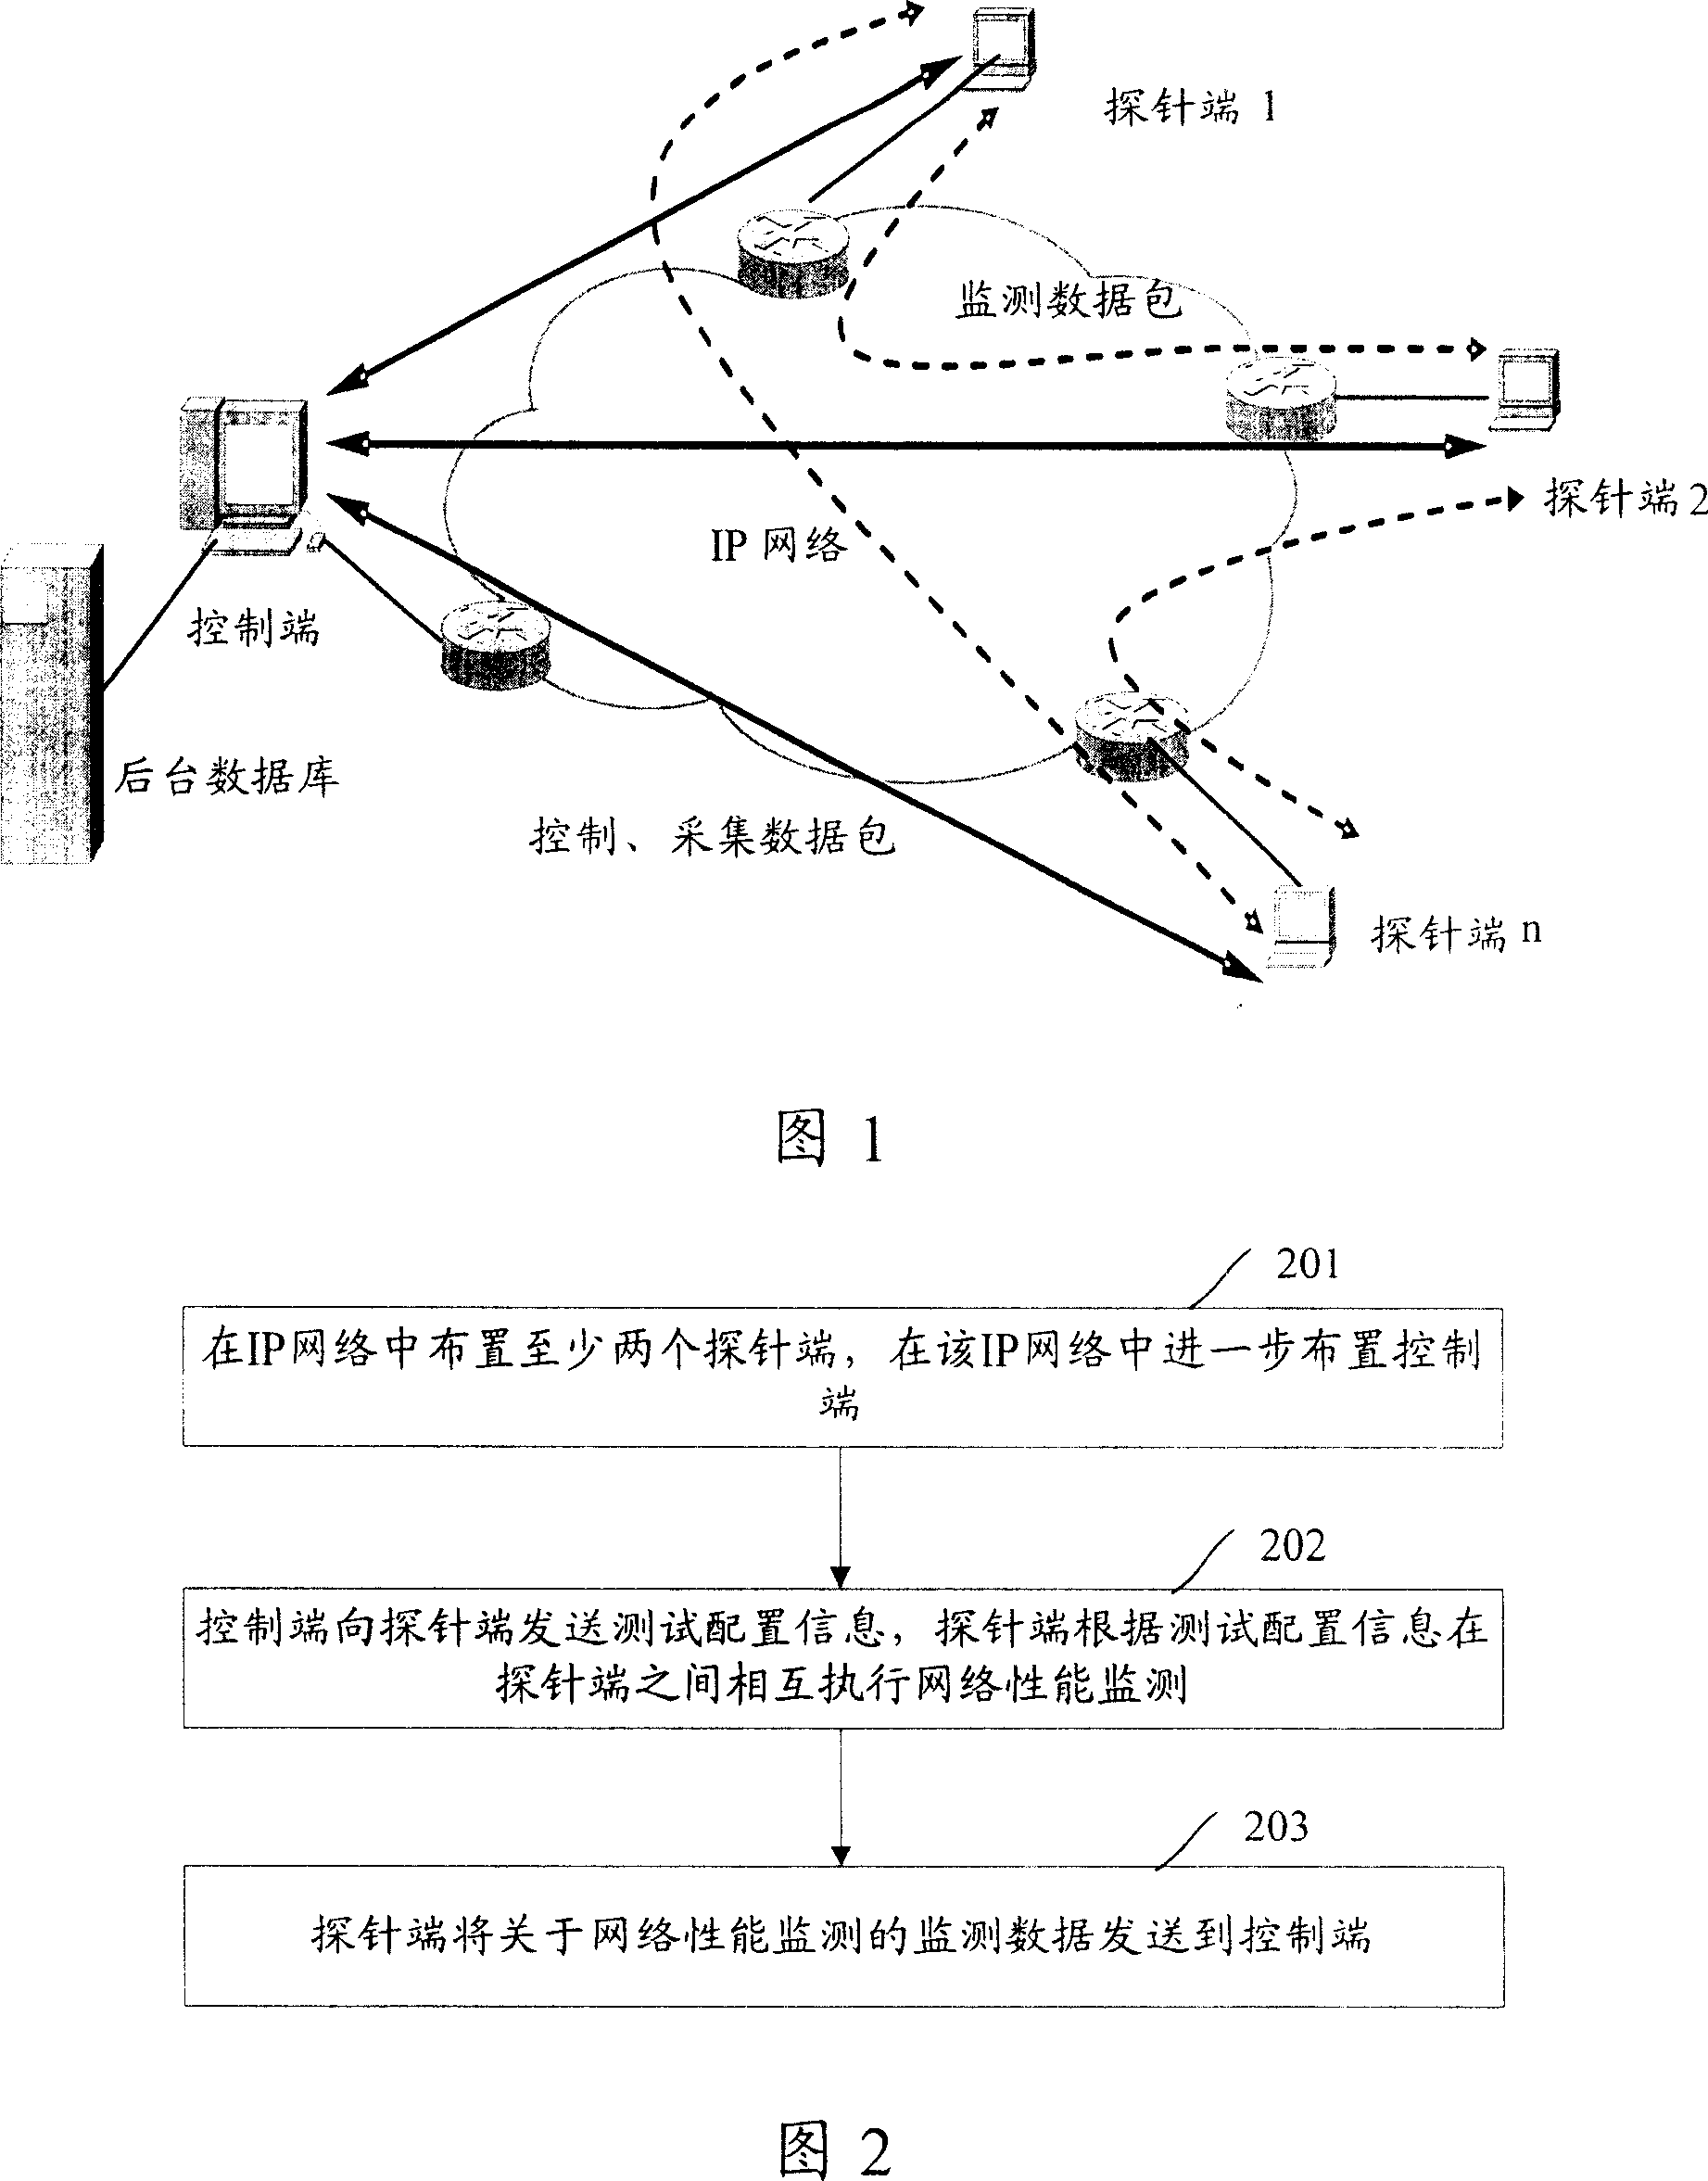 Internet protocol network end-to-end performance monitoring system and method